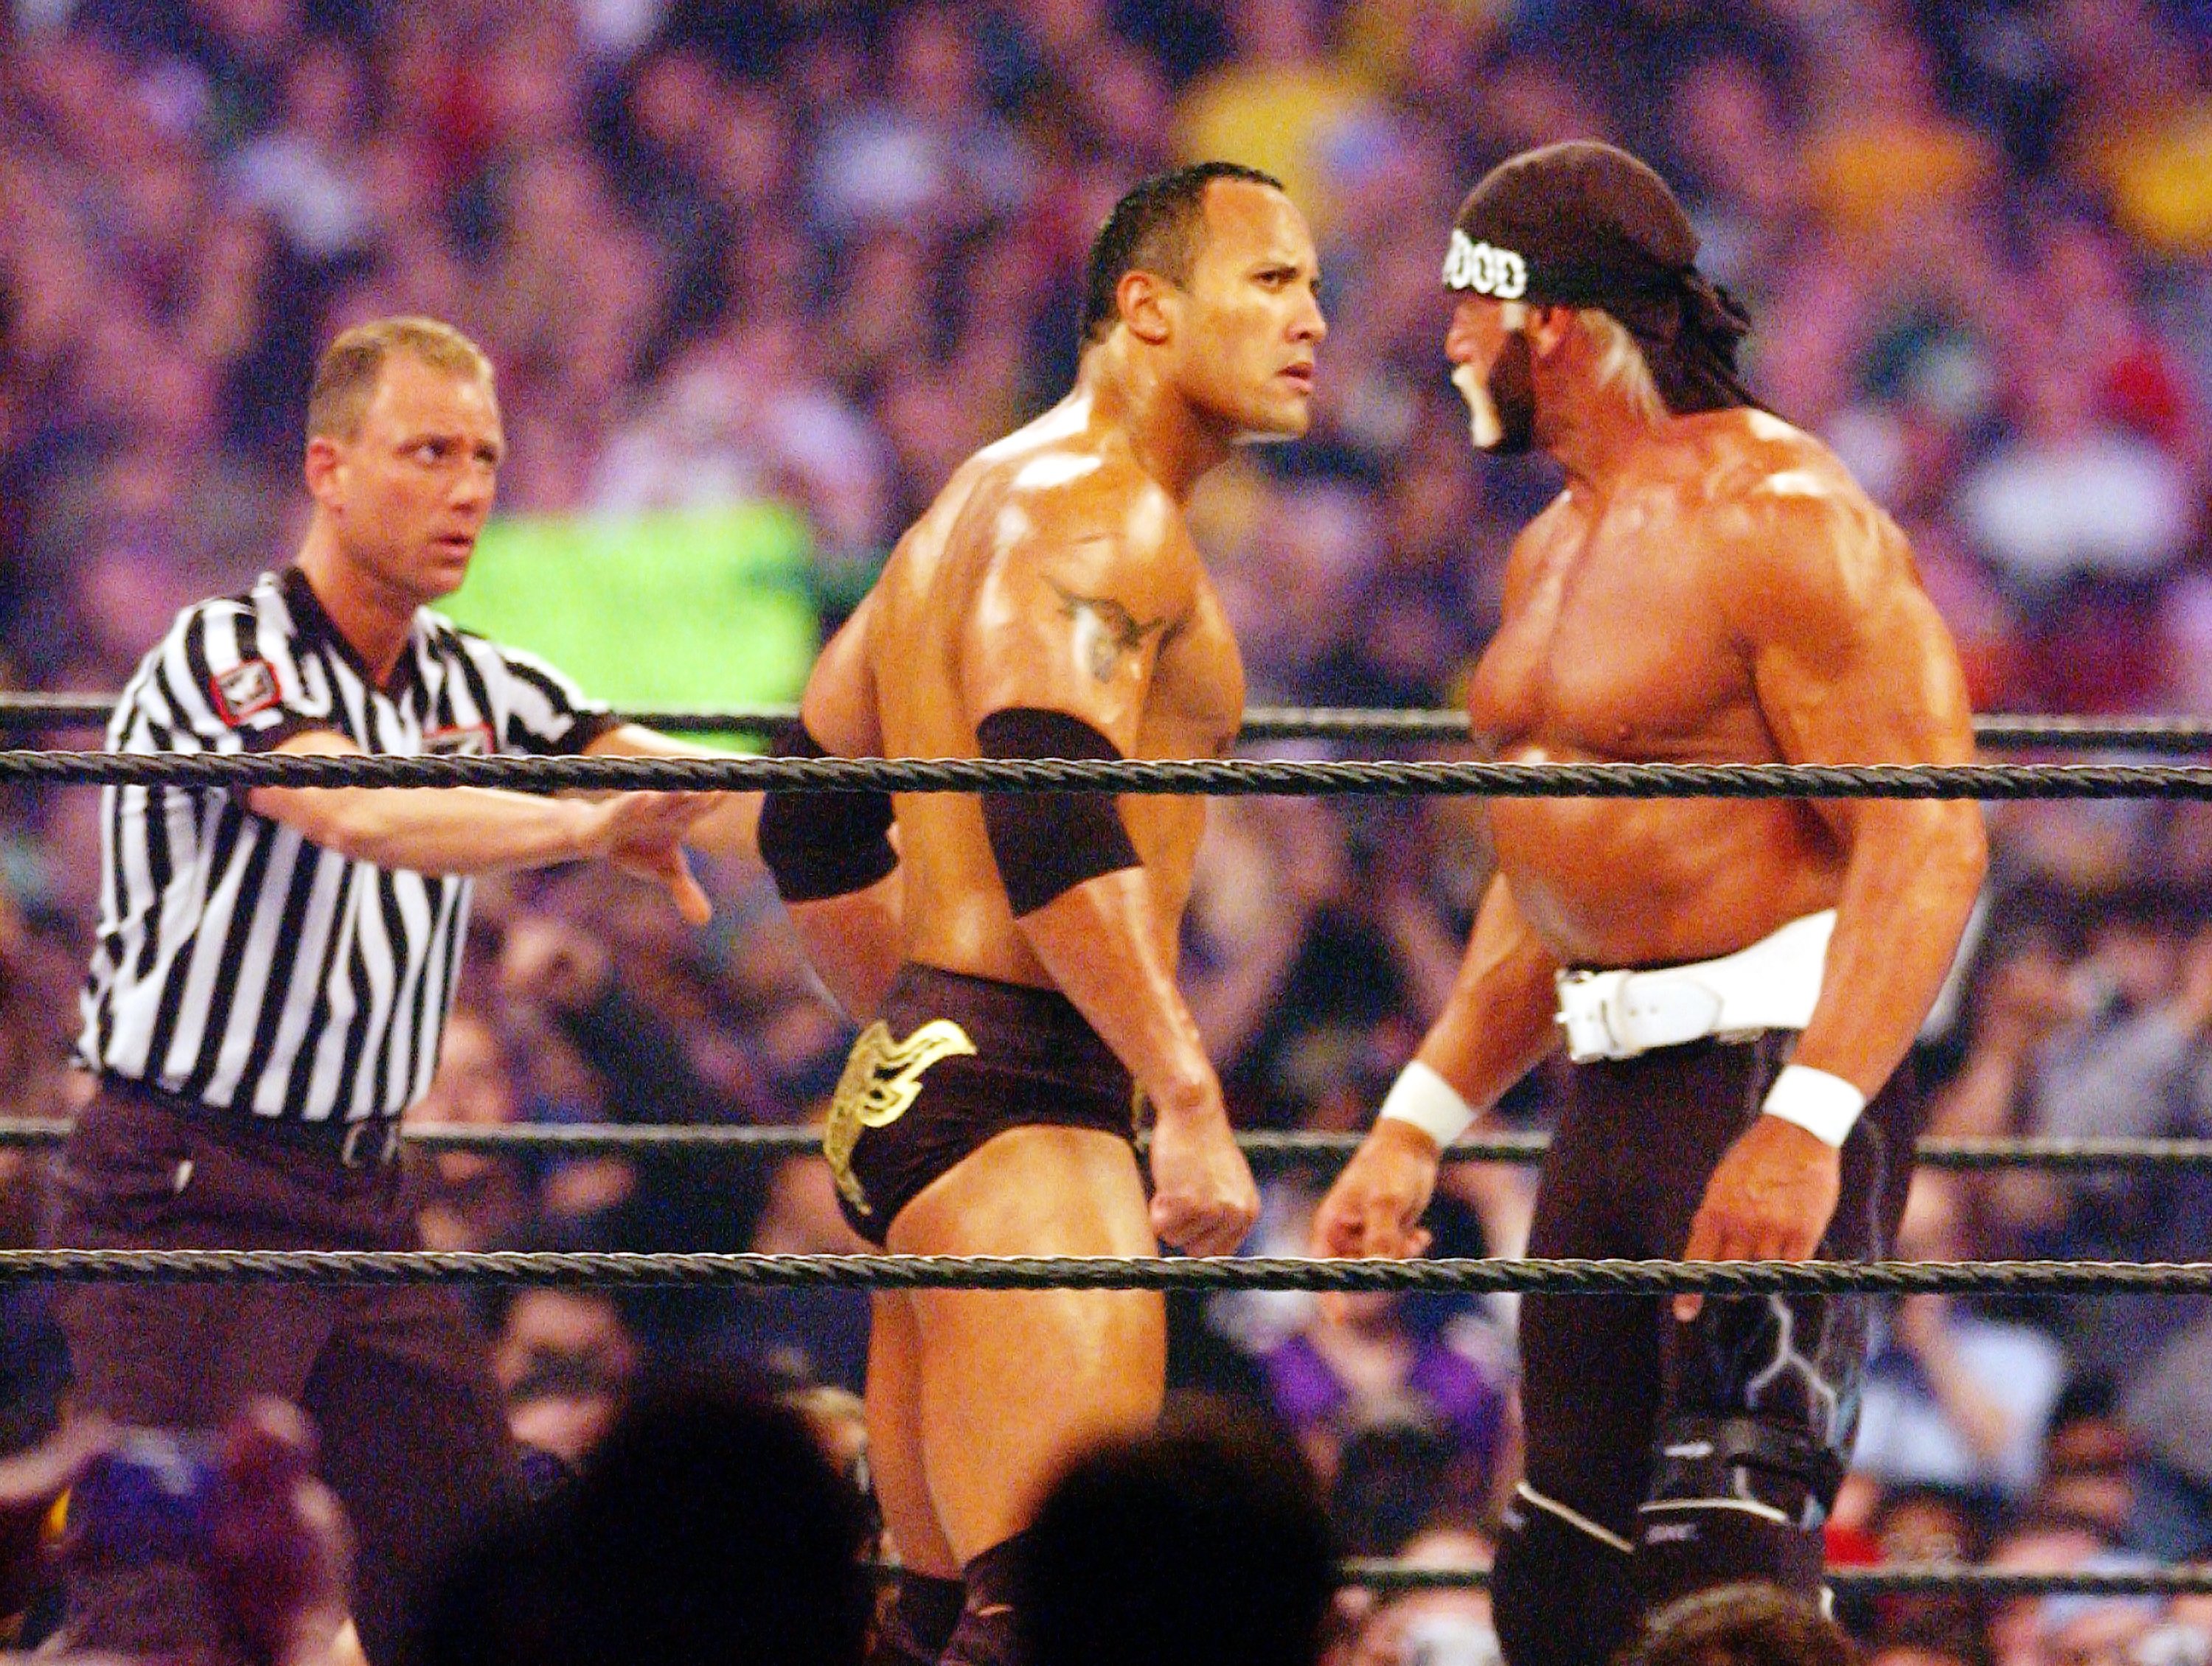 práctico lb a menudo JTEonYT on Twitter: "The Rock vs Hulk Hogan at WrestleMania X8 is  everything a 5 Star Match SHOULD Represent. From the drama, to the story,  to the electrified crowd hanging off every